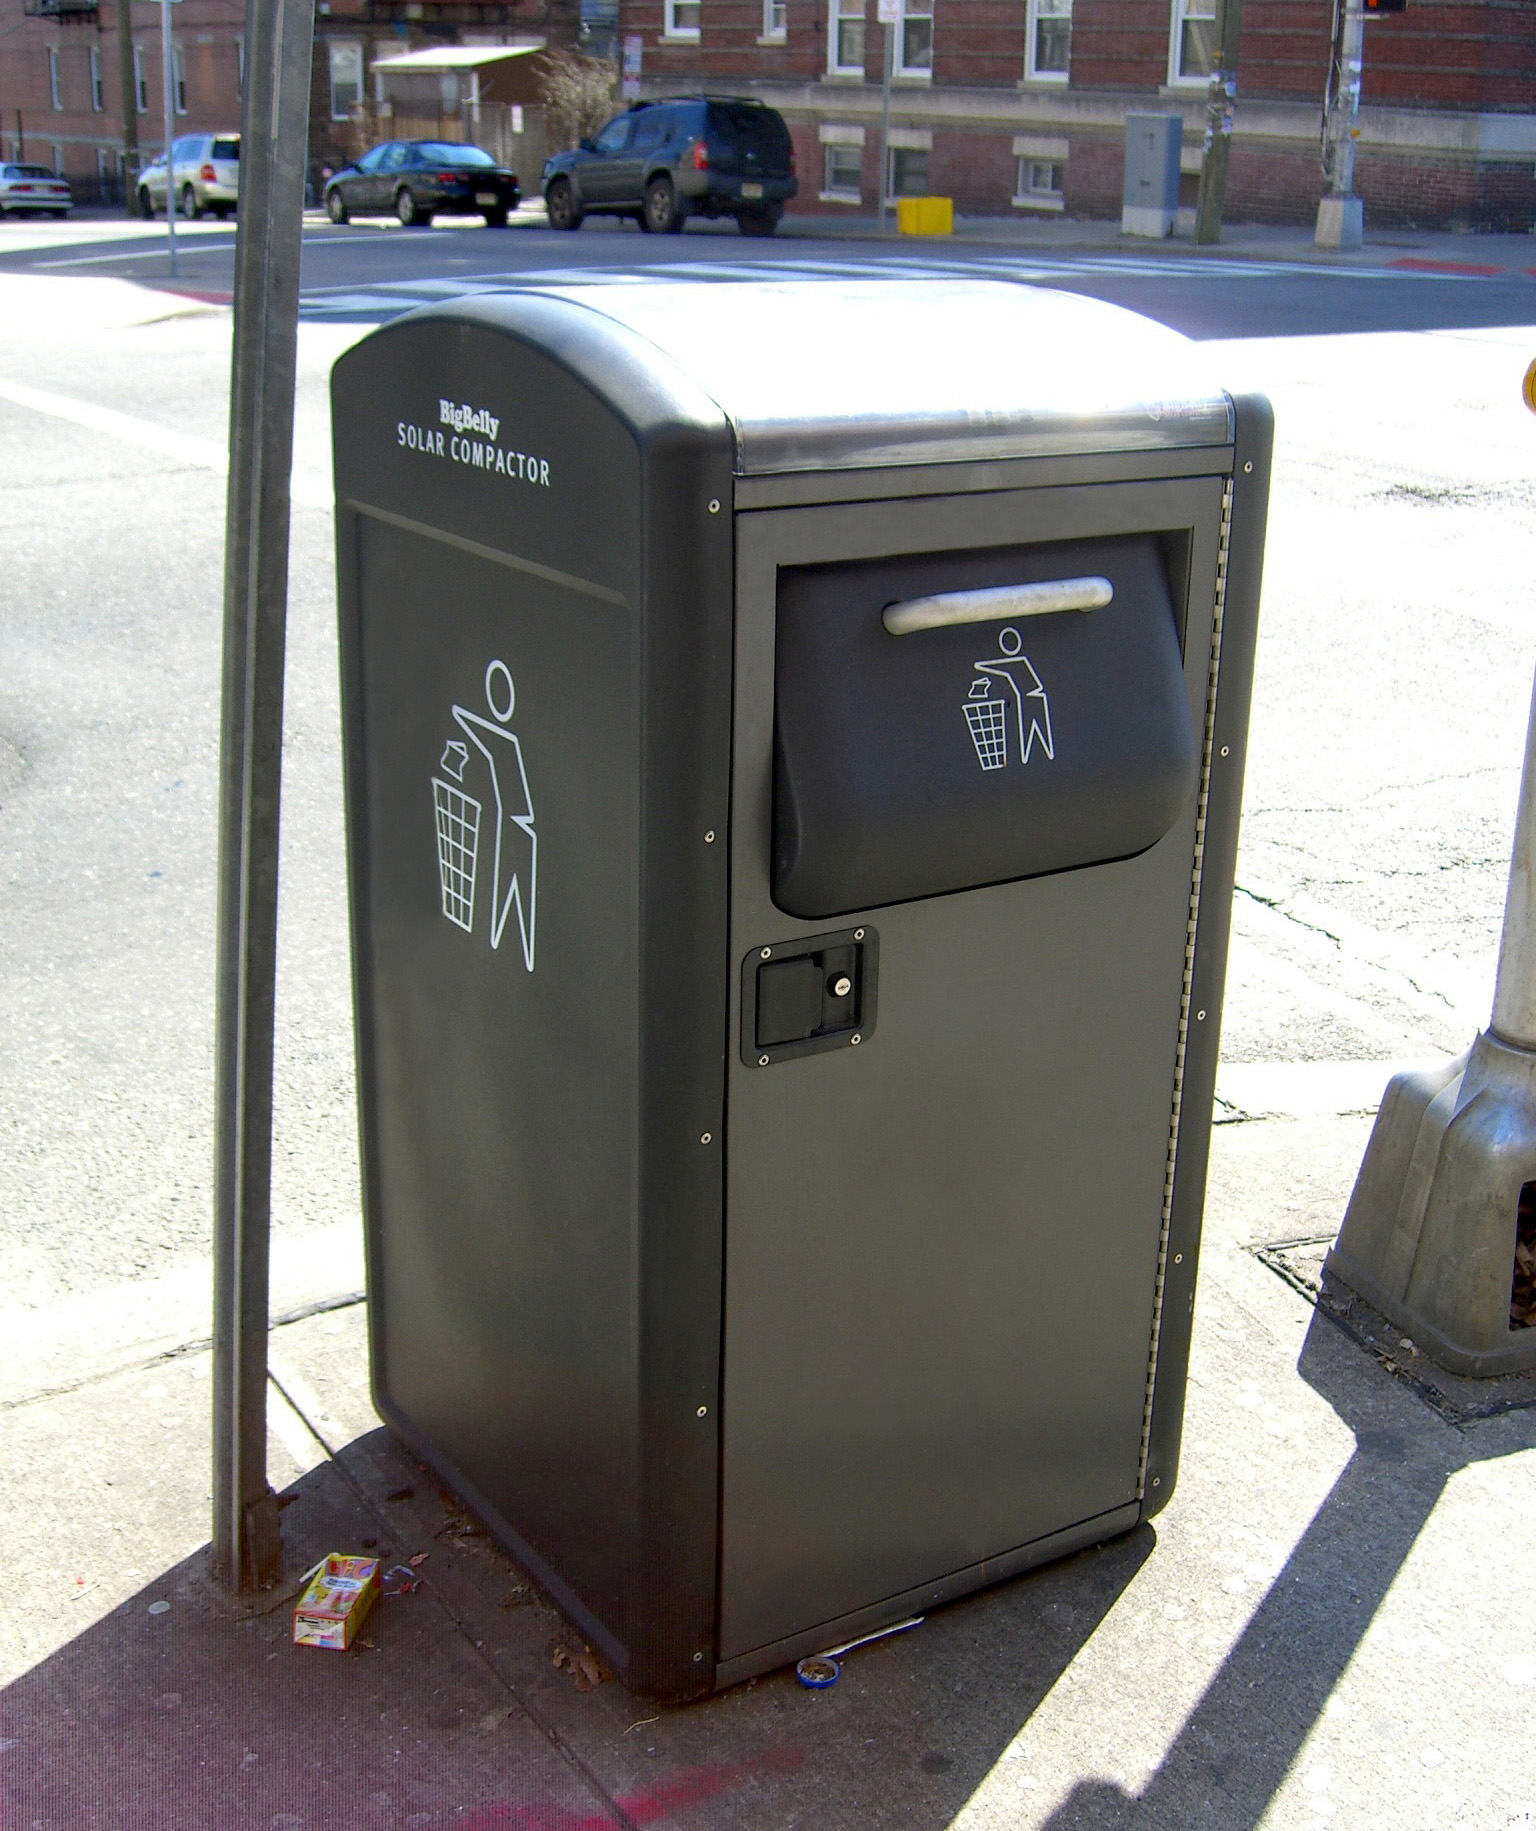 A solar photovoltaic trash compactor. These are now commonplace in Victoria and Vancouver.